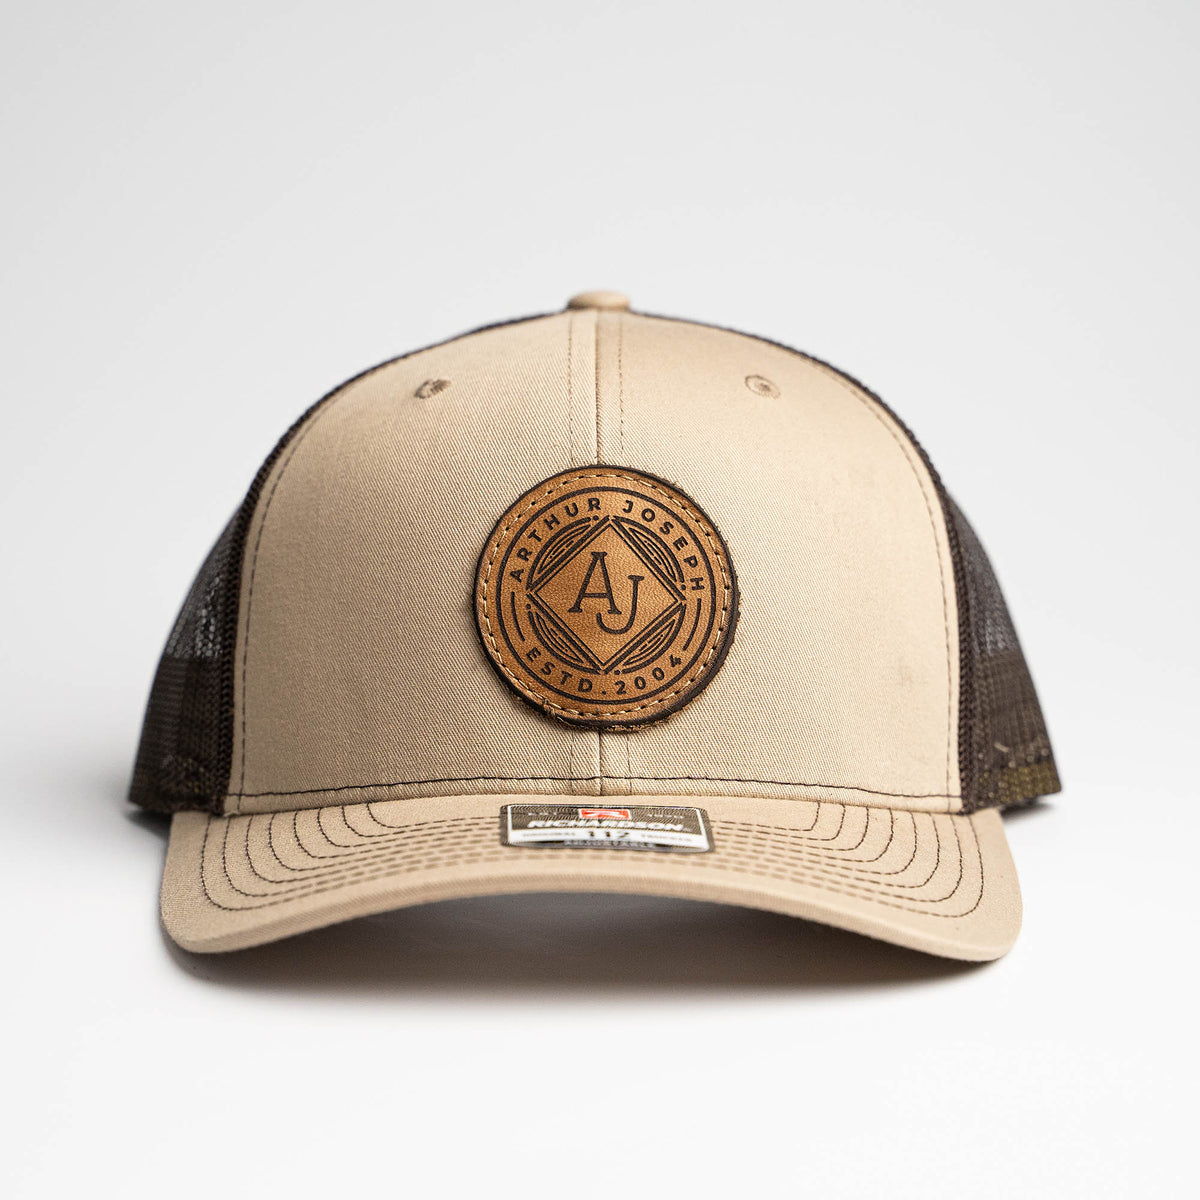 Men's Custom Leather Patch Hat - Your Logo or Design